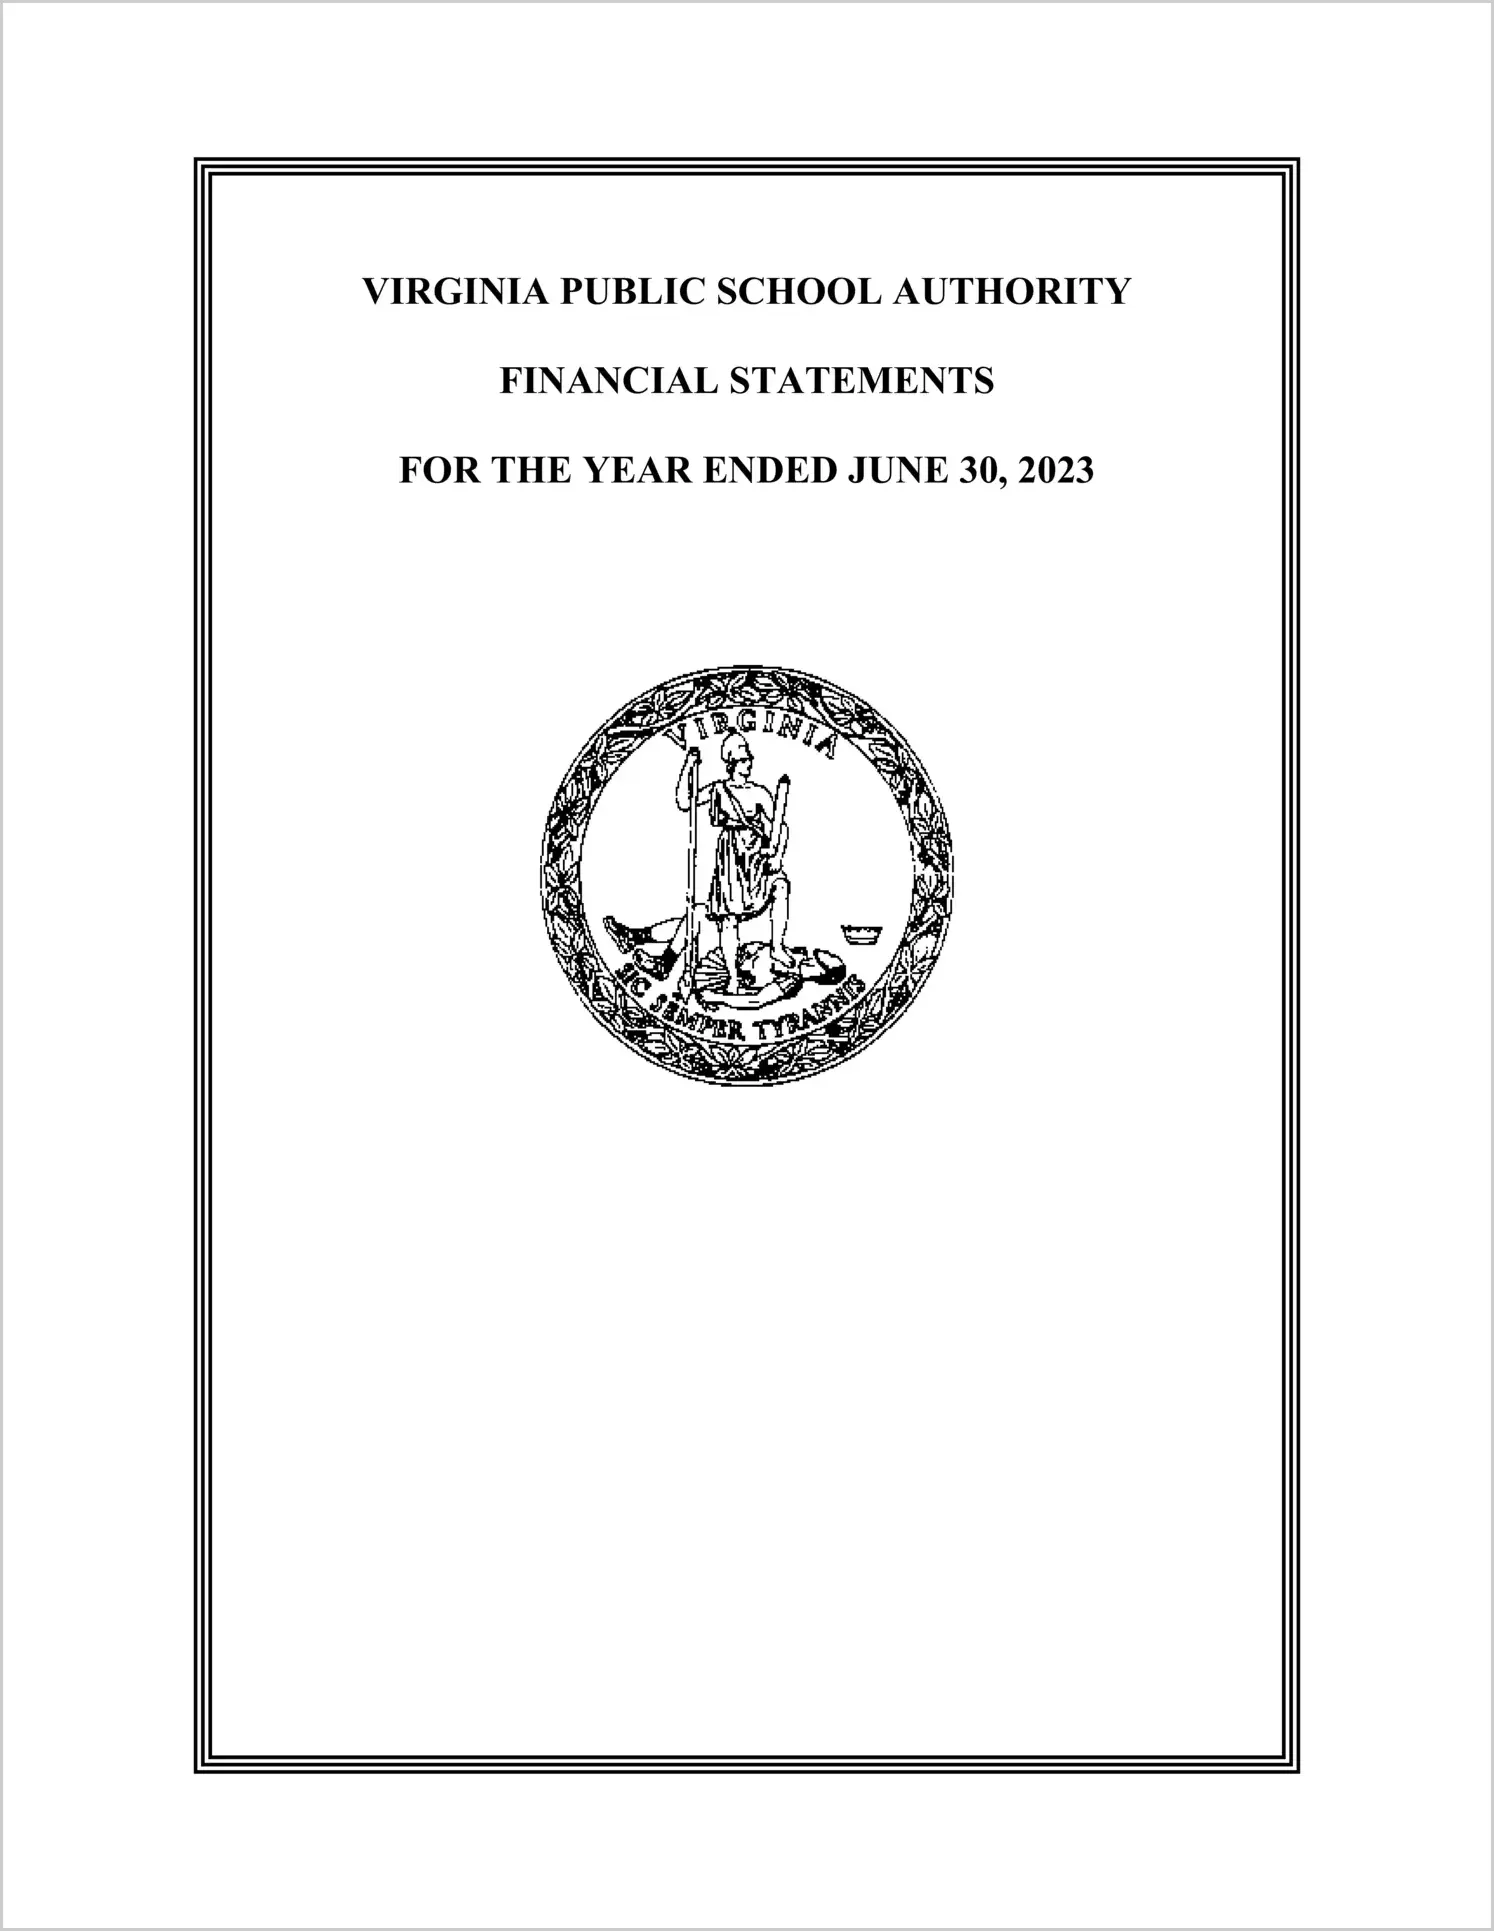 Virginia Public School Authority Financial Statements for the year ended June 30, 2023